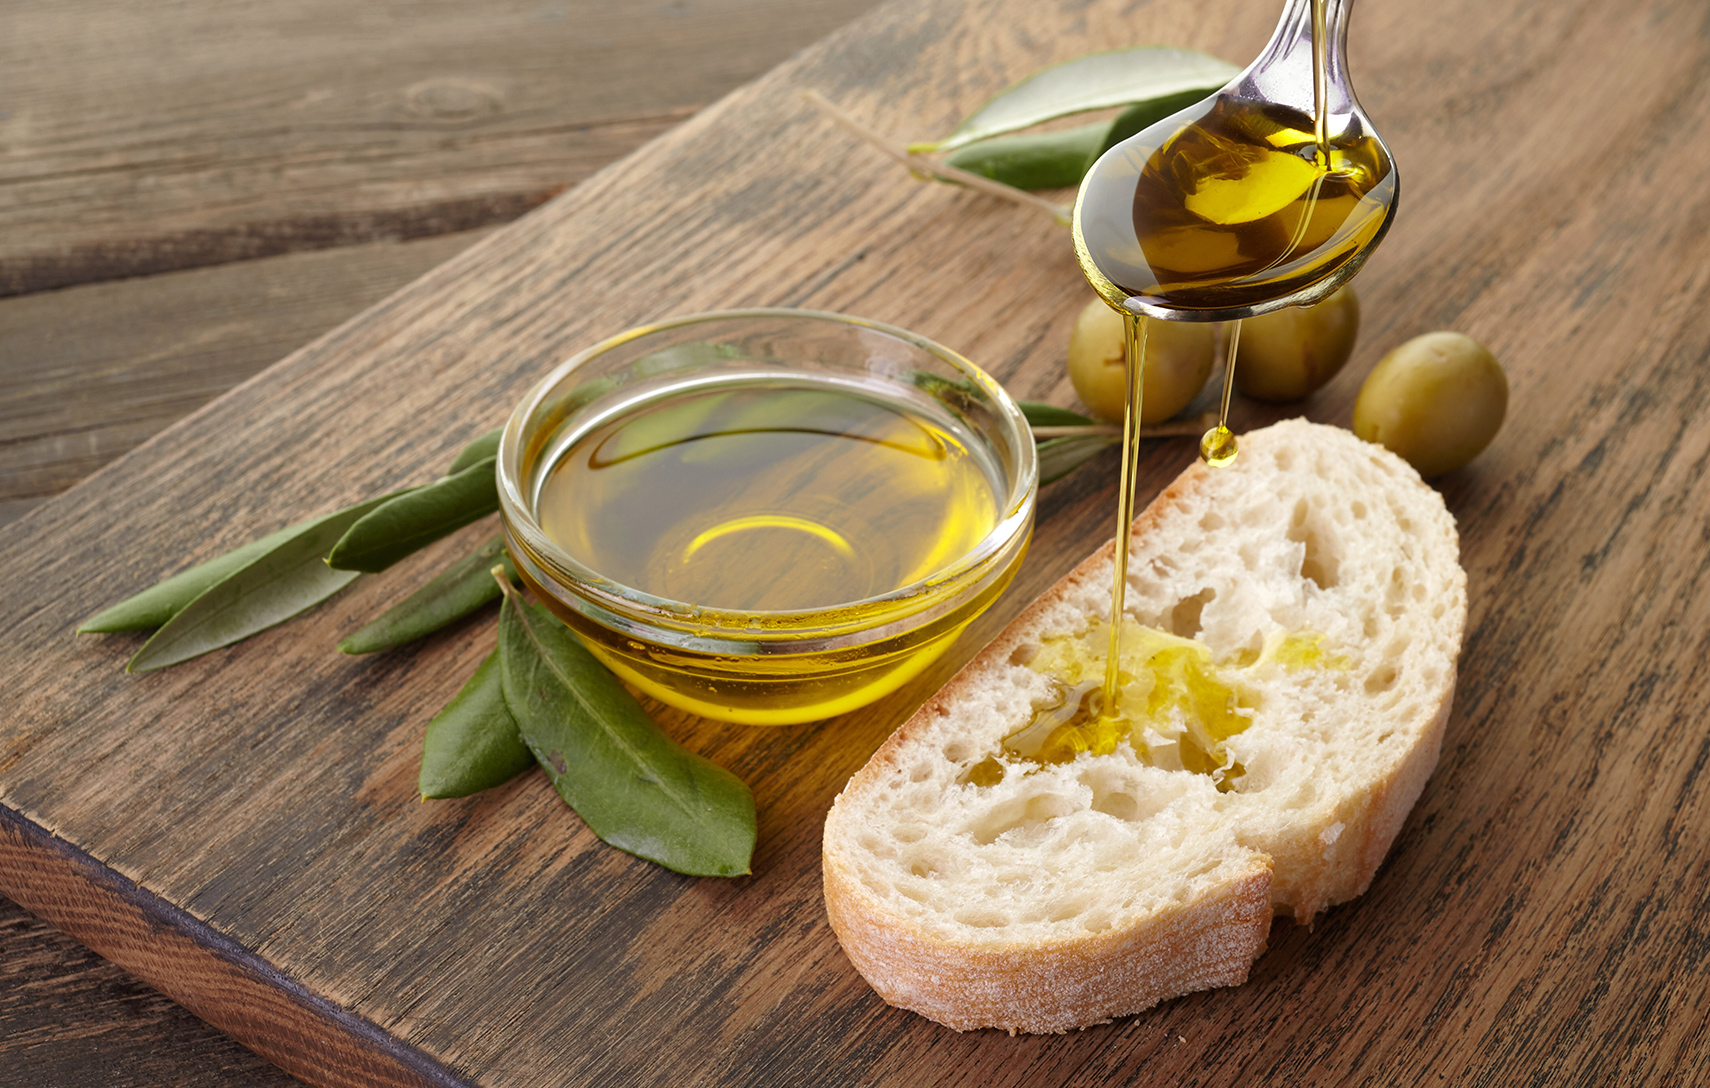  Heavenly Olive Oils & Vinegars - Here are 5 Proven Health Benefits of Extra Virgin Olive Oil - Heavenly Olive Oils & Vinegars 